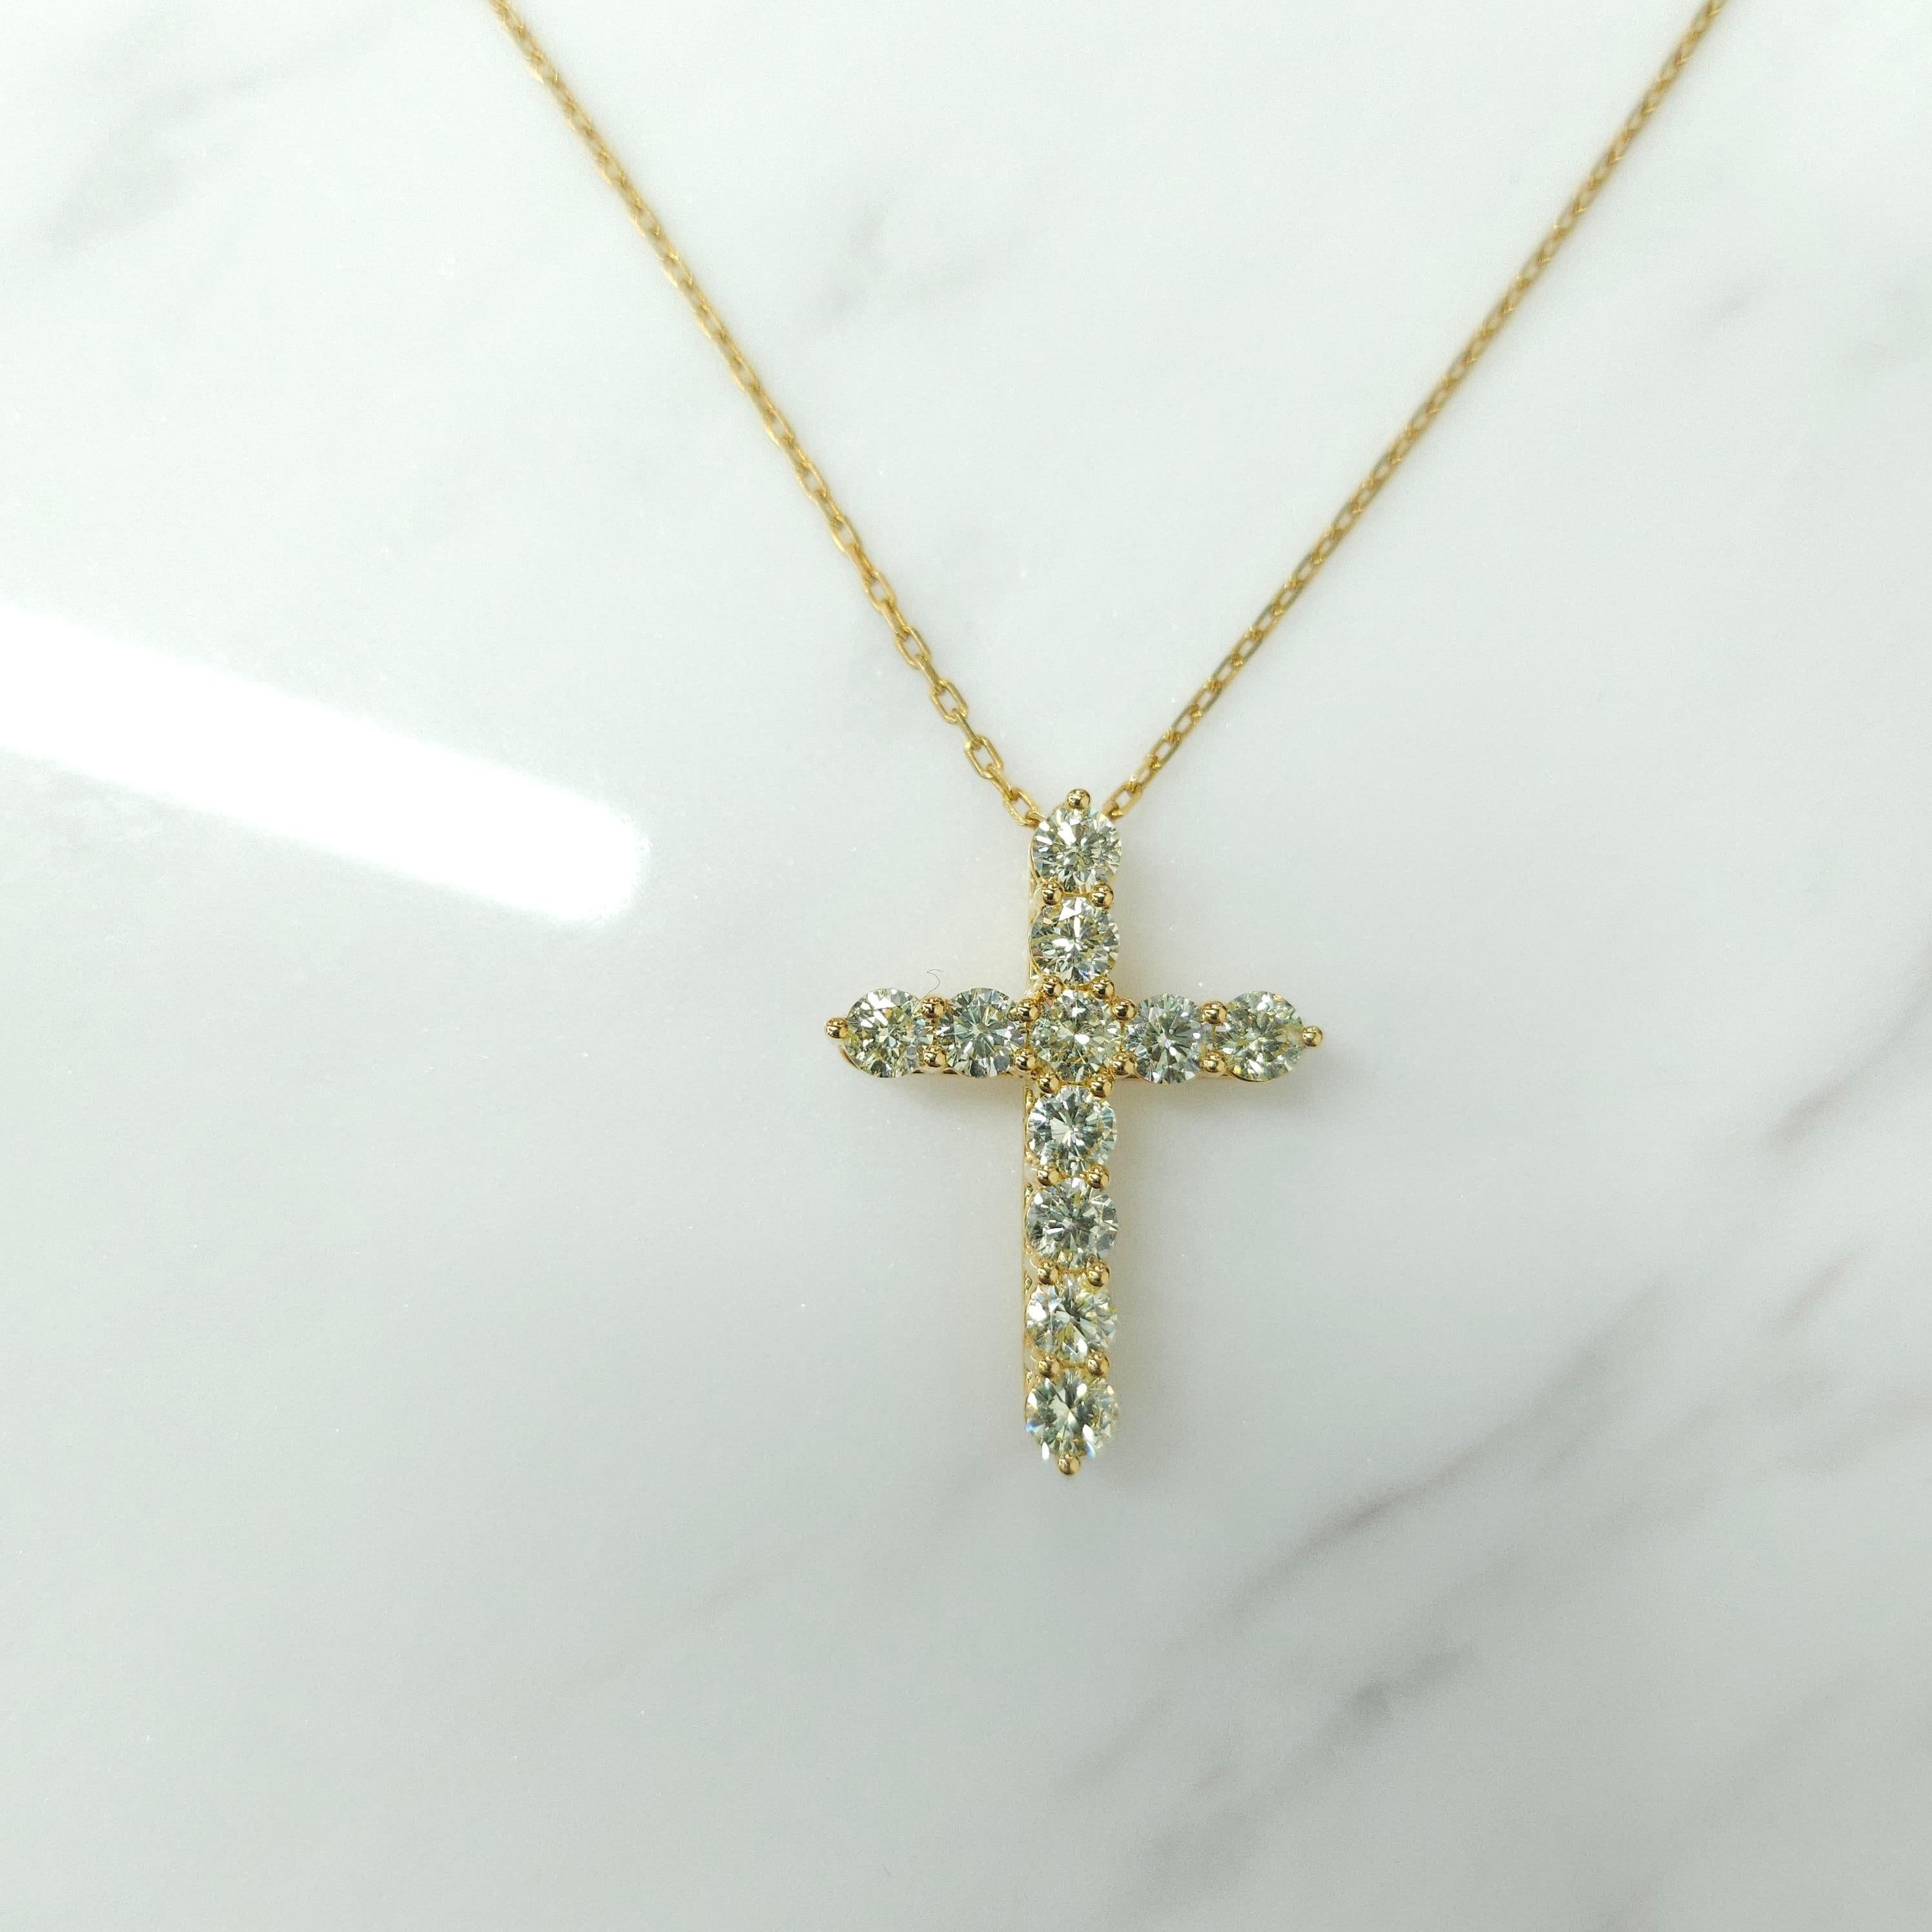 A precious interpretation of a classic motif, our cross pendant in 18K yellow gold is available in a variety of different carat weights, seen here with 0.14 carat diamonds. Deftly suspended from a gold chain, each diamond is embraced by a minimal